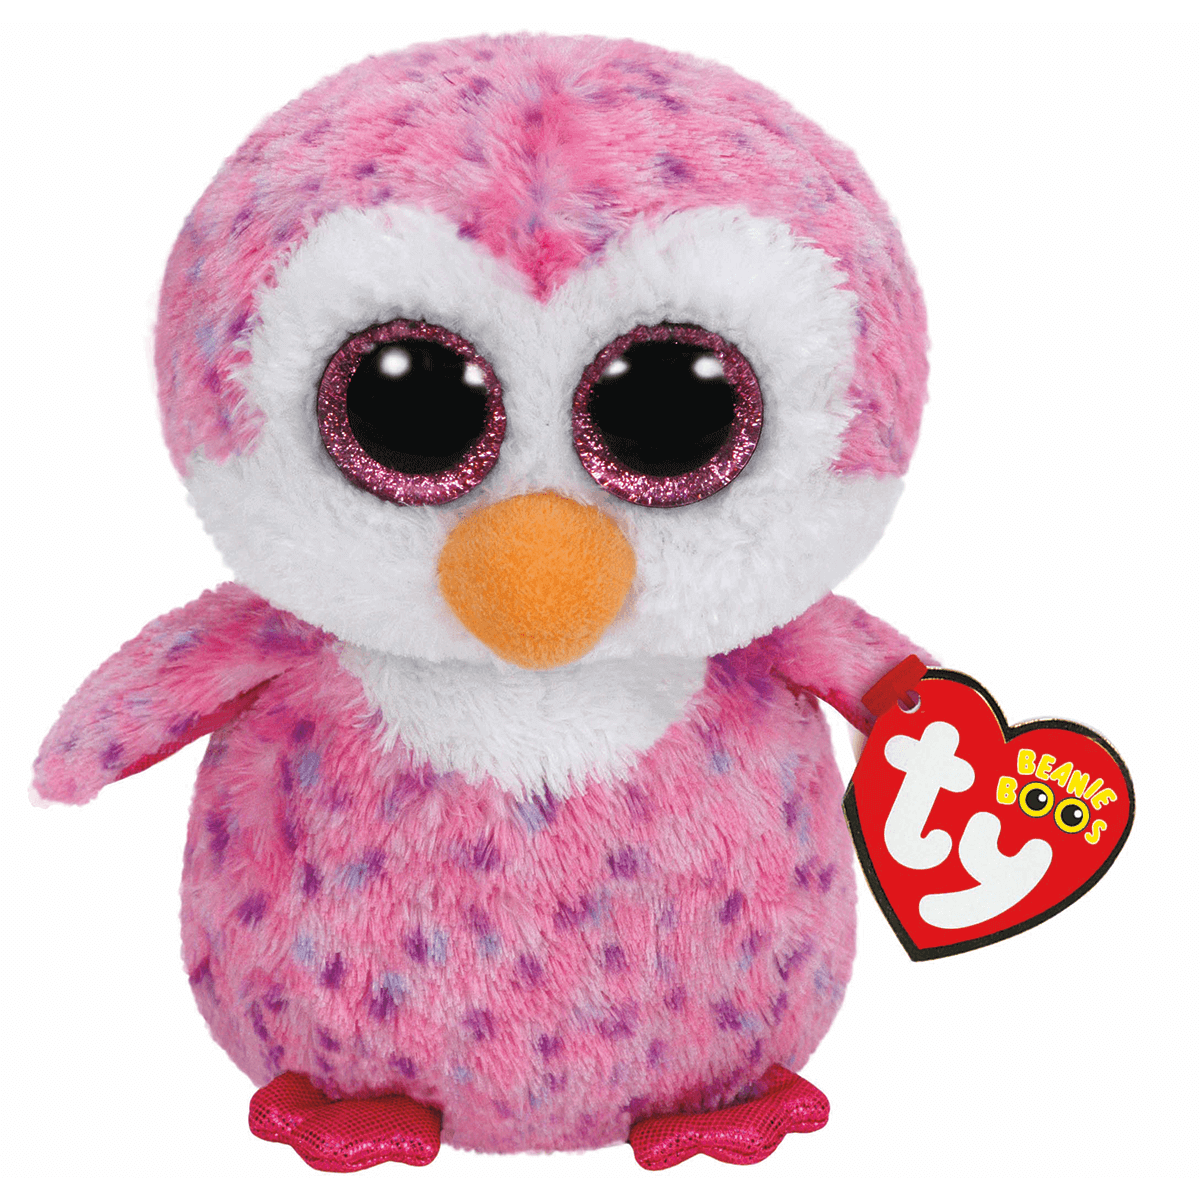  Ty Beanie Boos - Glider the Penguin 15cm Soft Toy